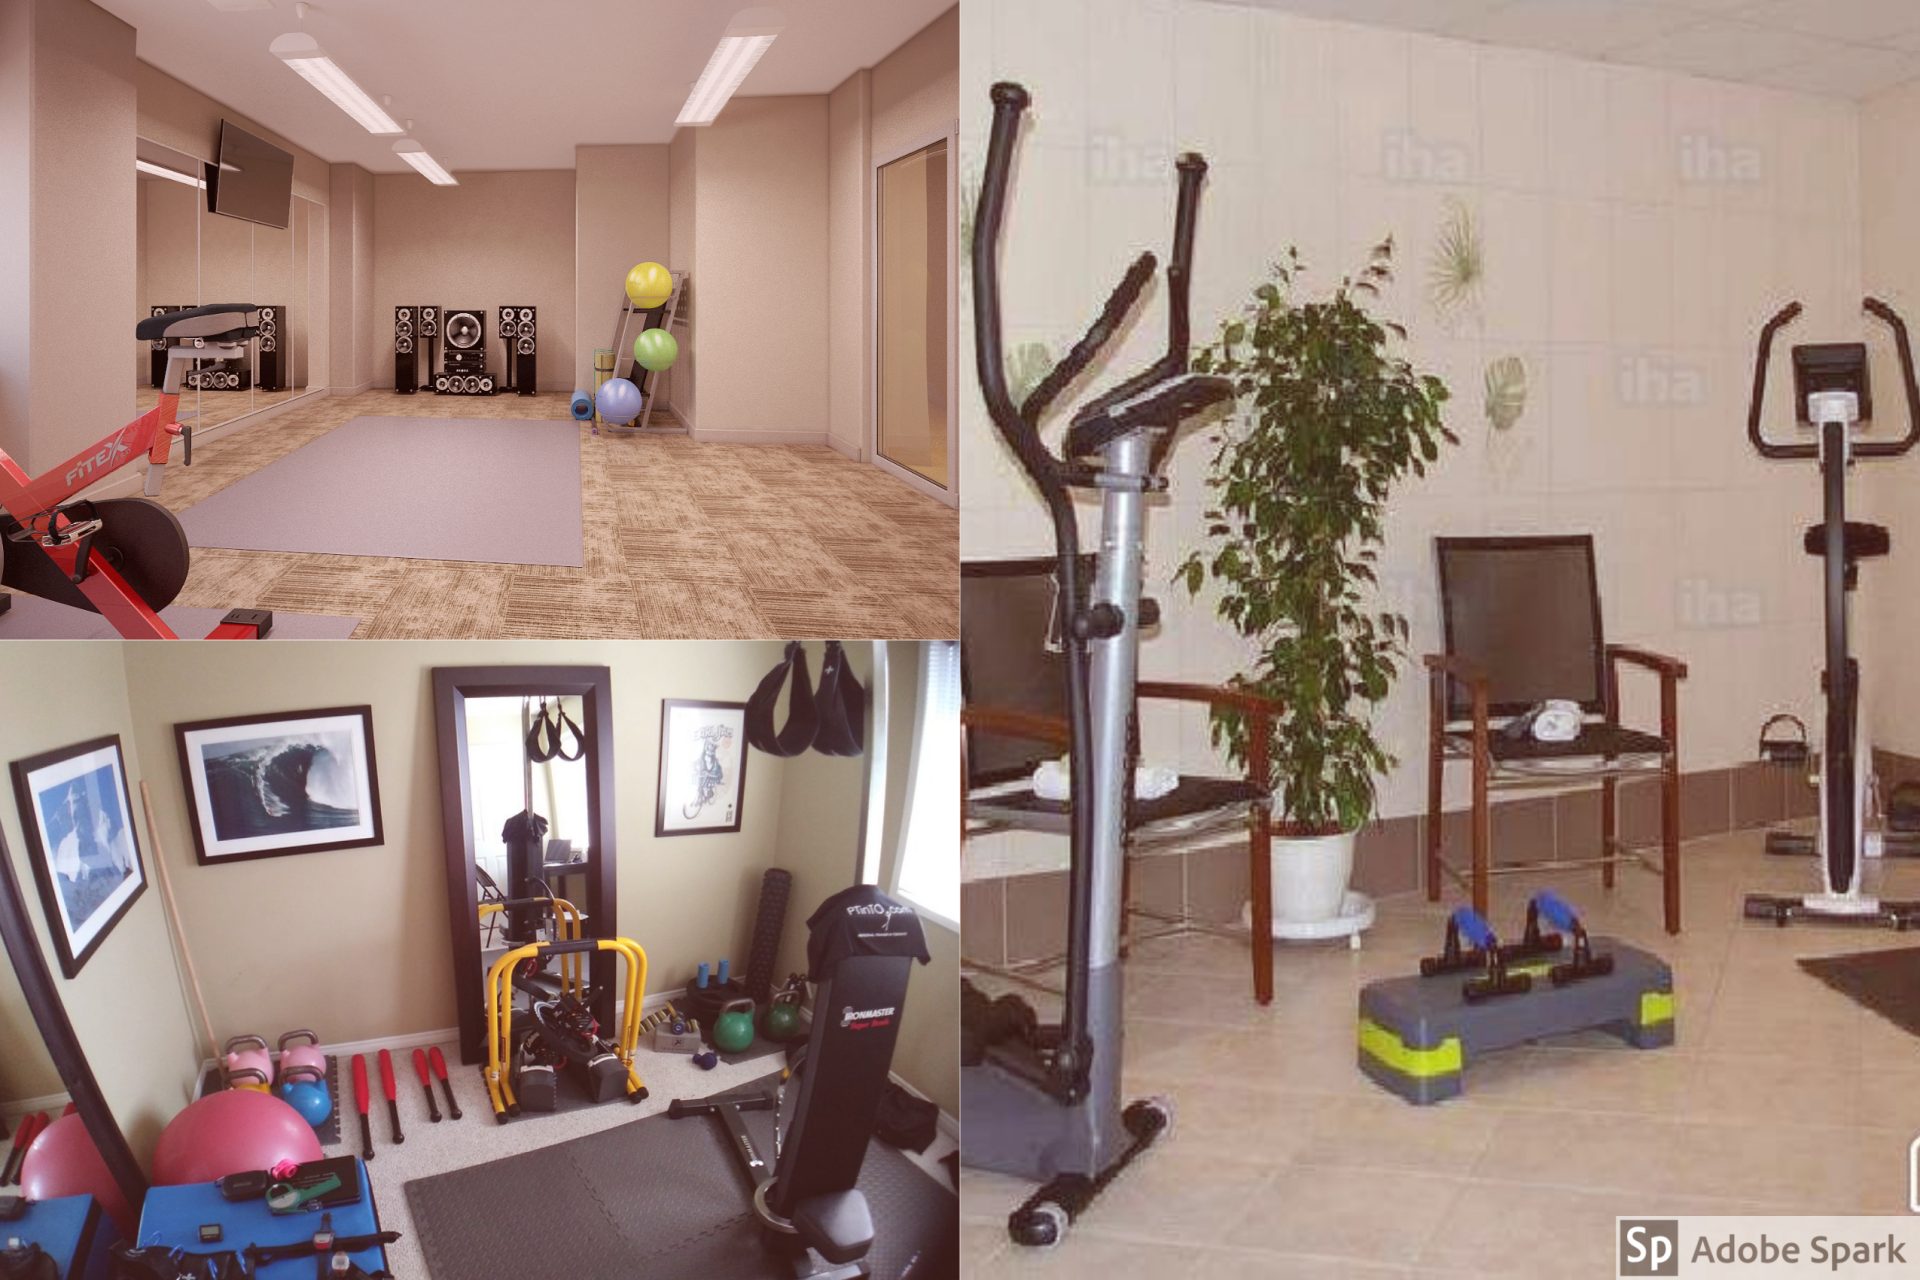 Own fitness room